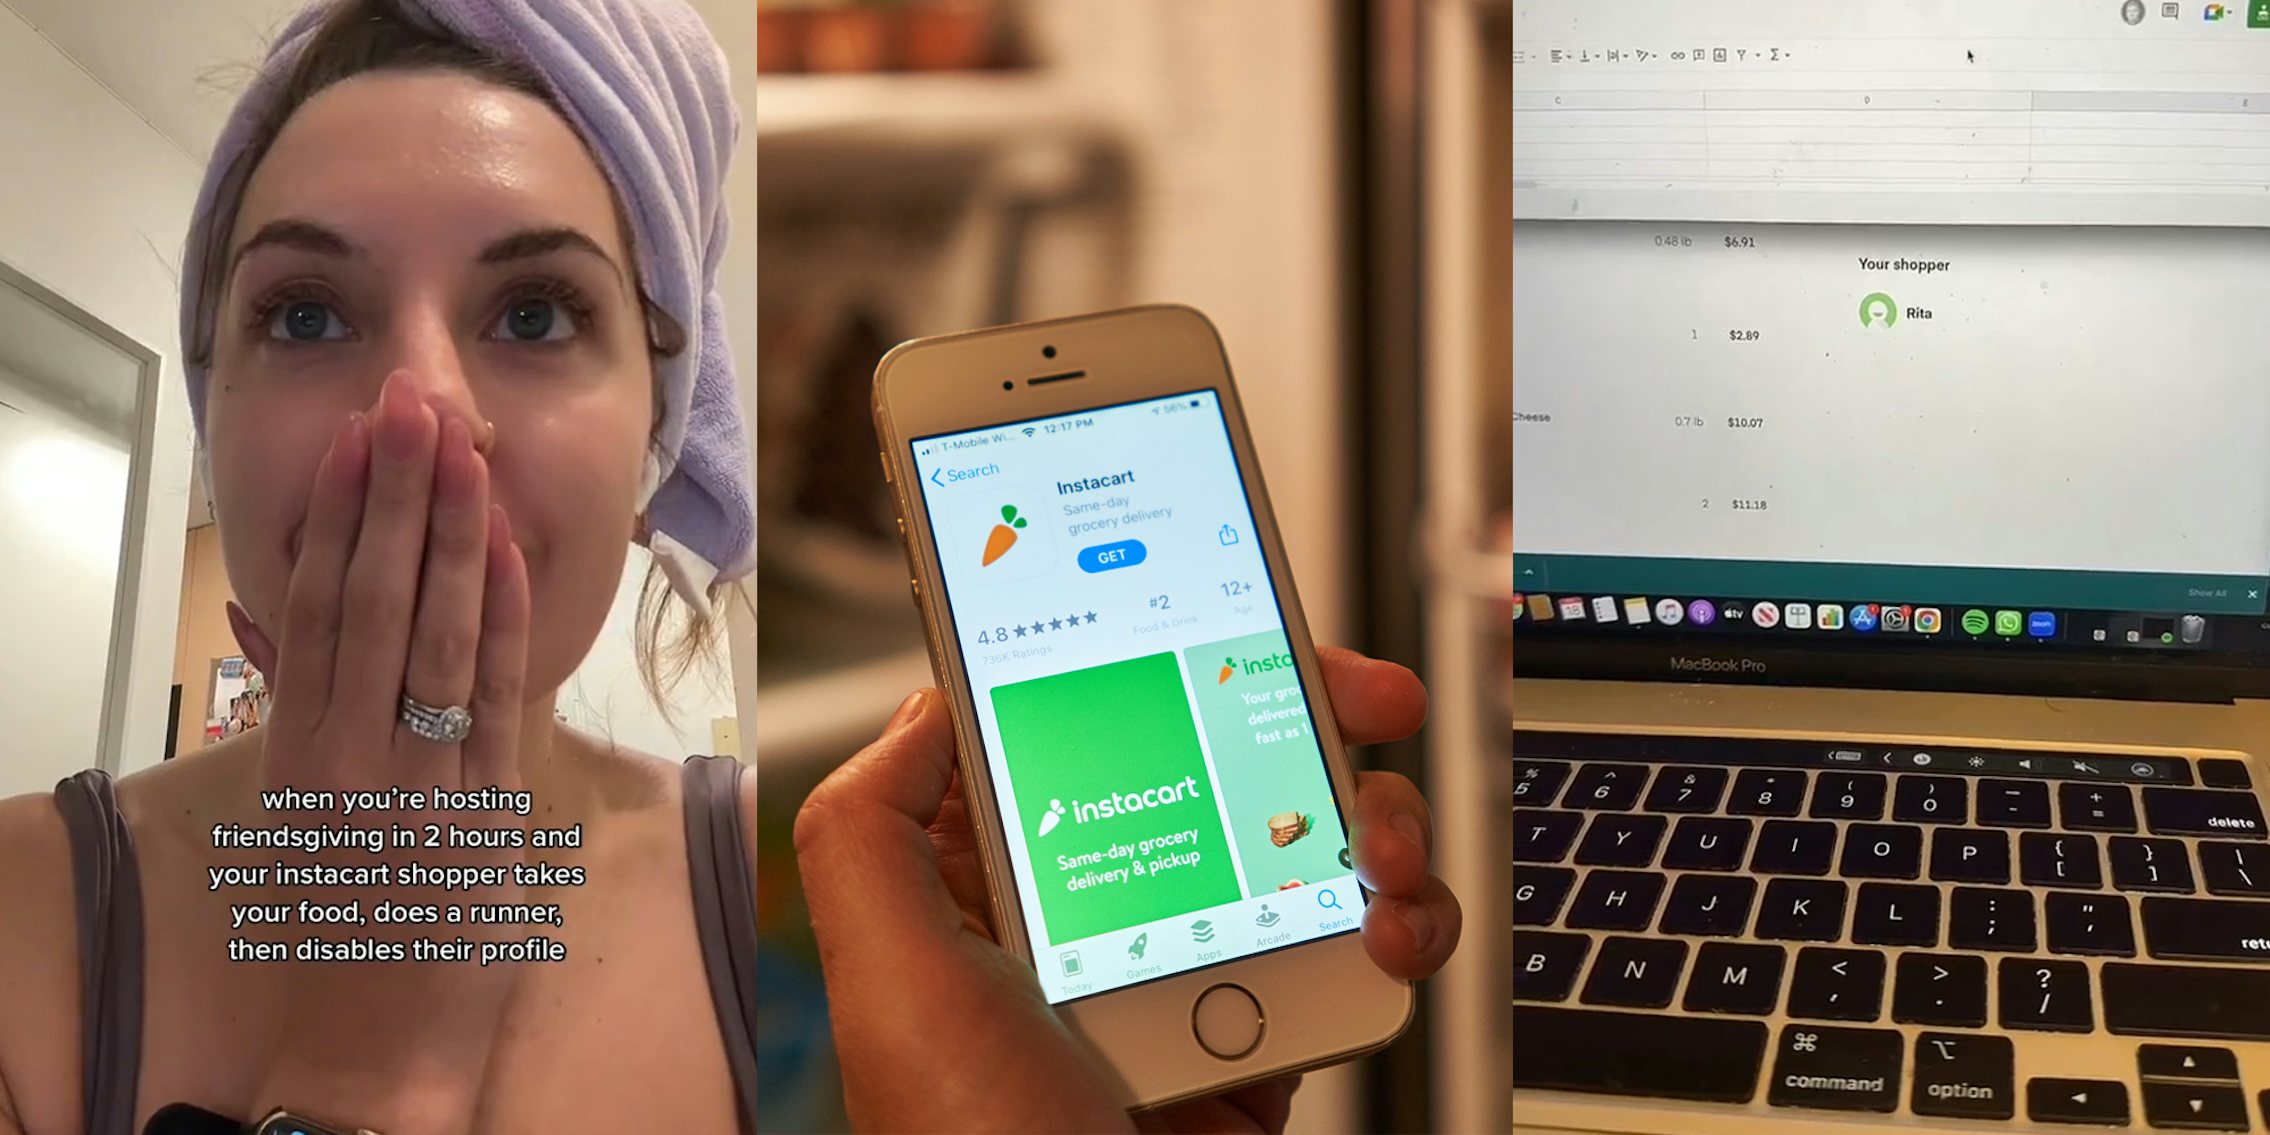 woman with hand on mouth caption 'when you're hosting friendsgiving in 2 hours and your instacart shopper takes your food, does a runner, then disables their profile' (l) Instacart app on phone in hand in front of blurred fridge background (c) Instacart shopper account on laptop screen (r)